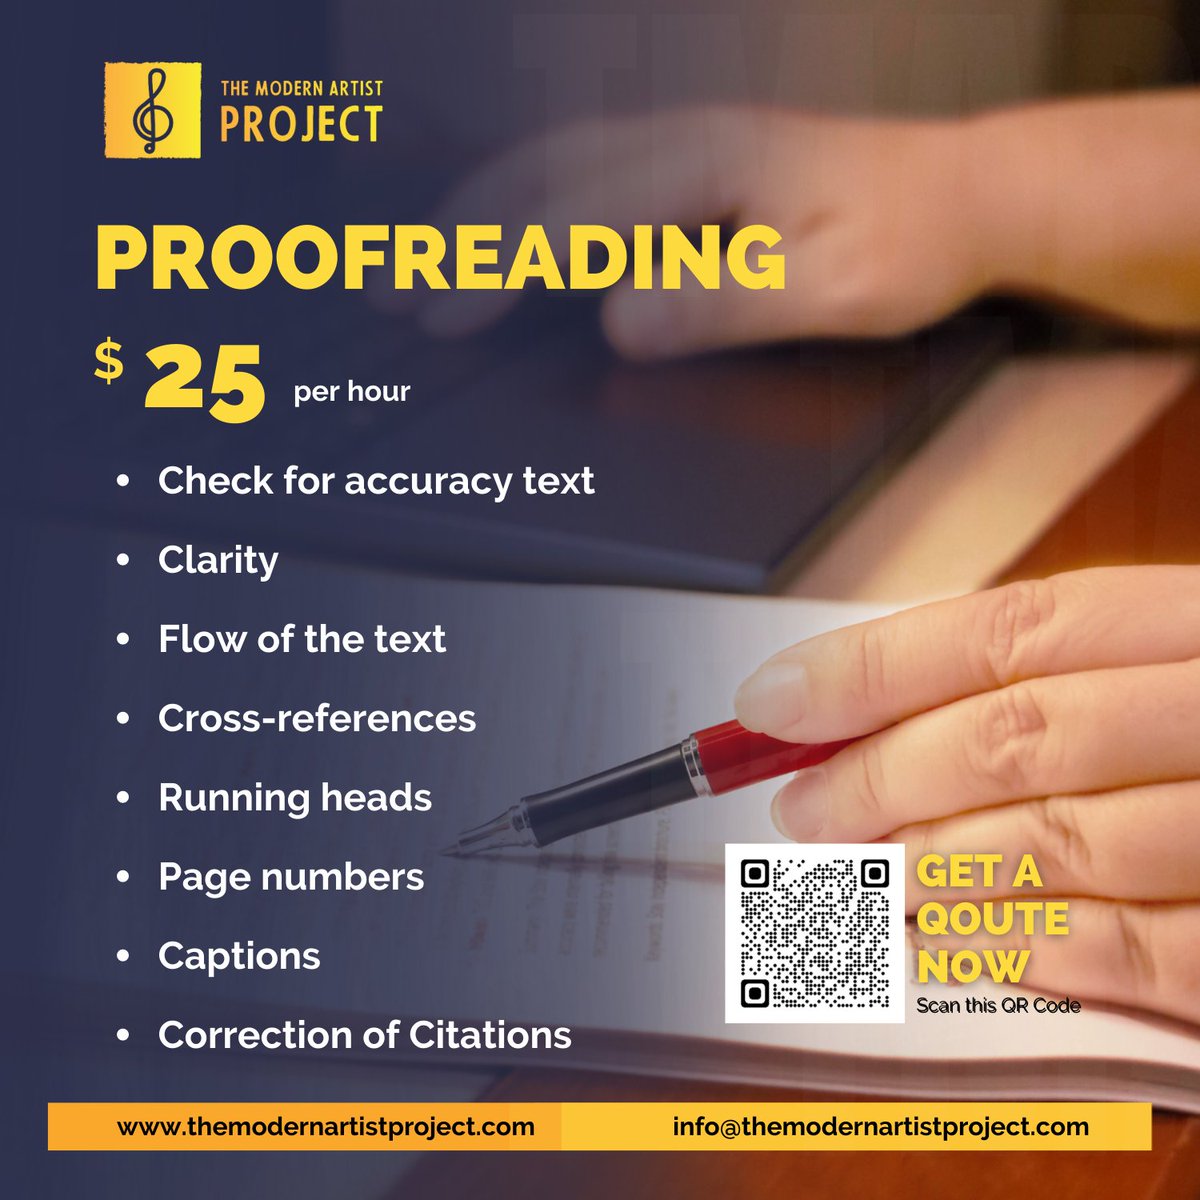 Details matter in the performance arts world. Make sure every aspect of your research is polished and professional with our proofreading services. From page numbers to citation corrections, we've got you covered. Trust us to help you present ... #proofreading #performancearts